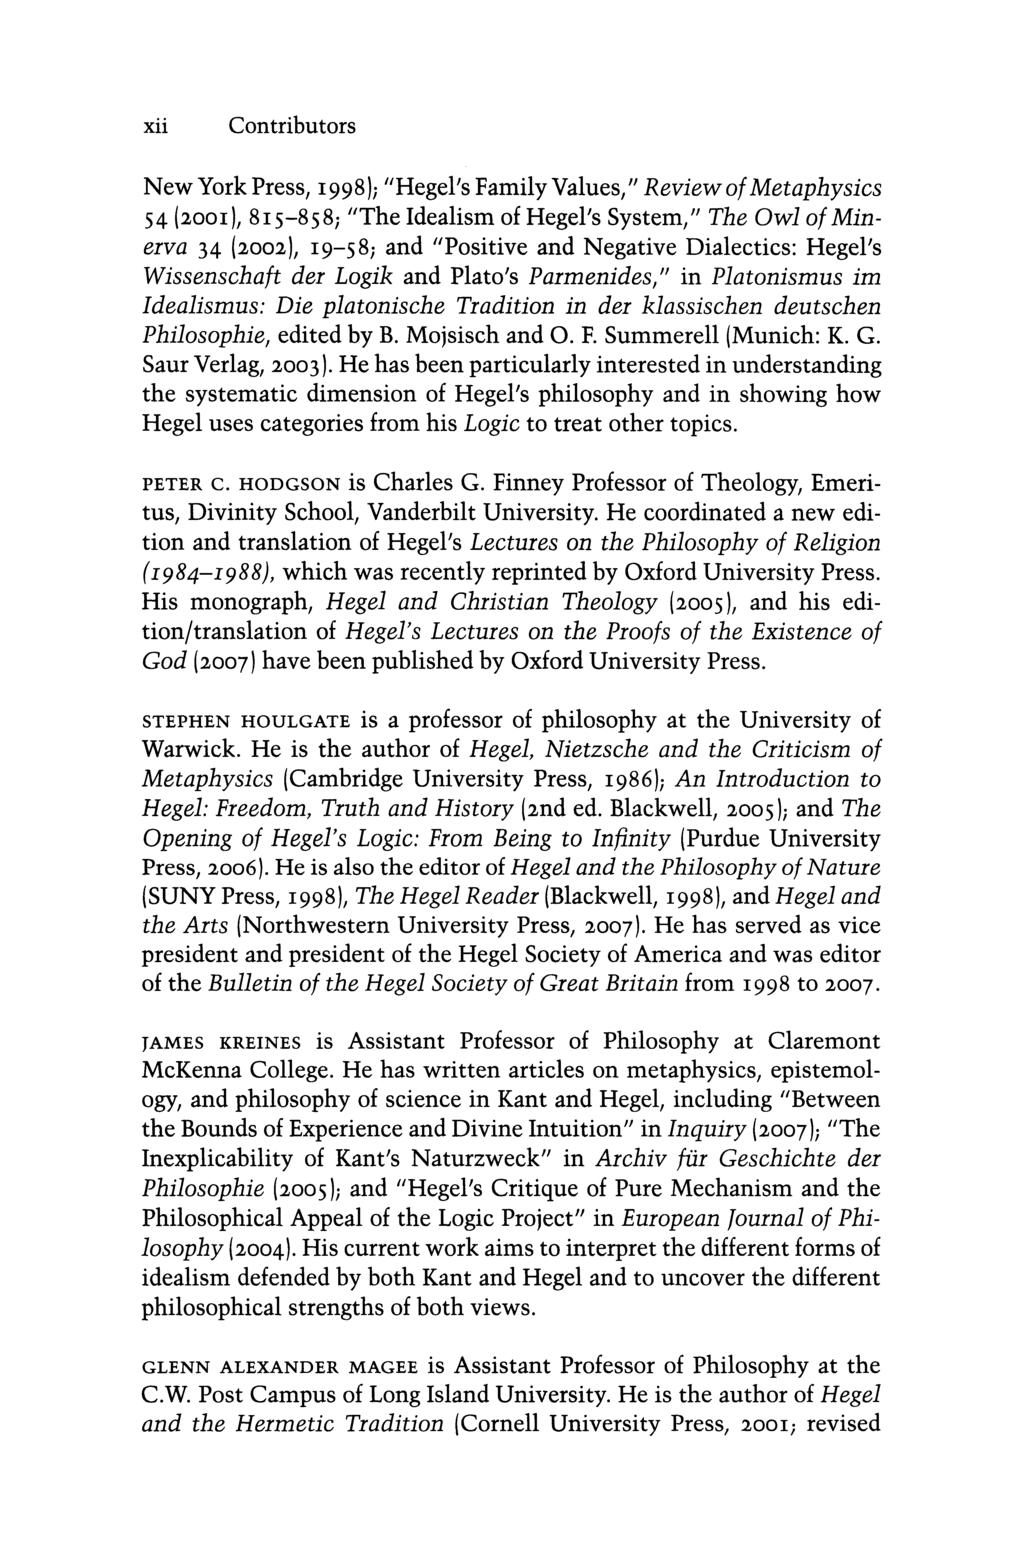 xii Contributors New York Press, 1998); "Hegel's Family Values," Review of Metaphysics S4 (2001), 81S-8S8; "The Idealism of Hegel's System," The Owl of Minerva 34 (2002), 19-58; and "Positive and